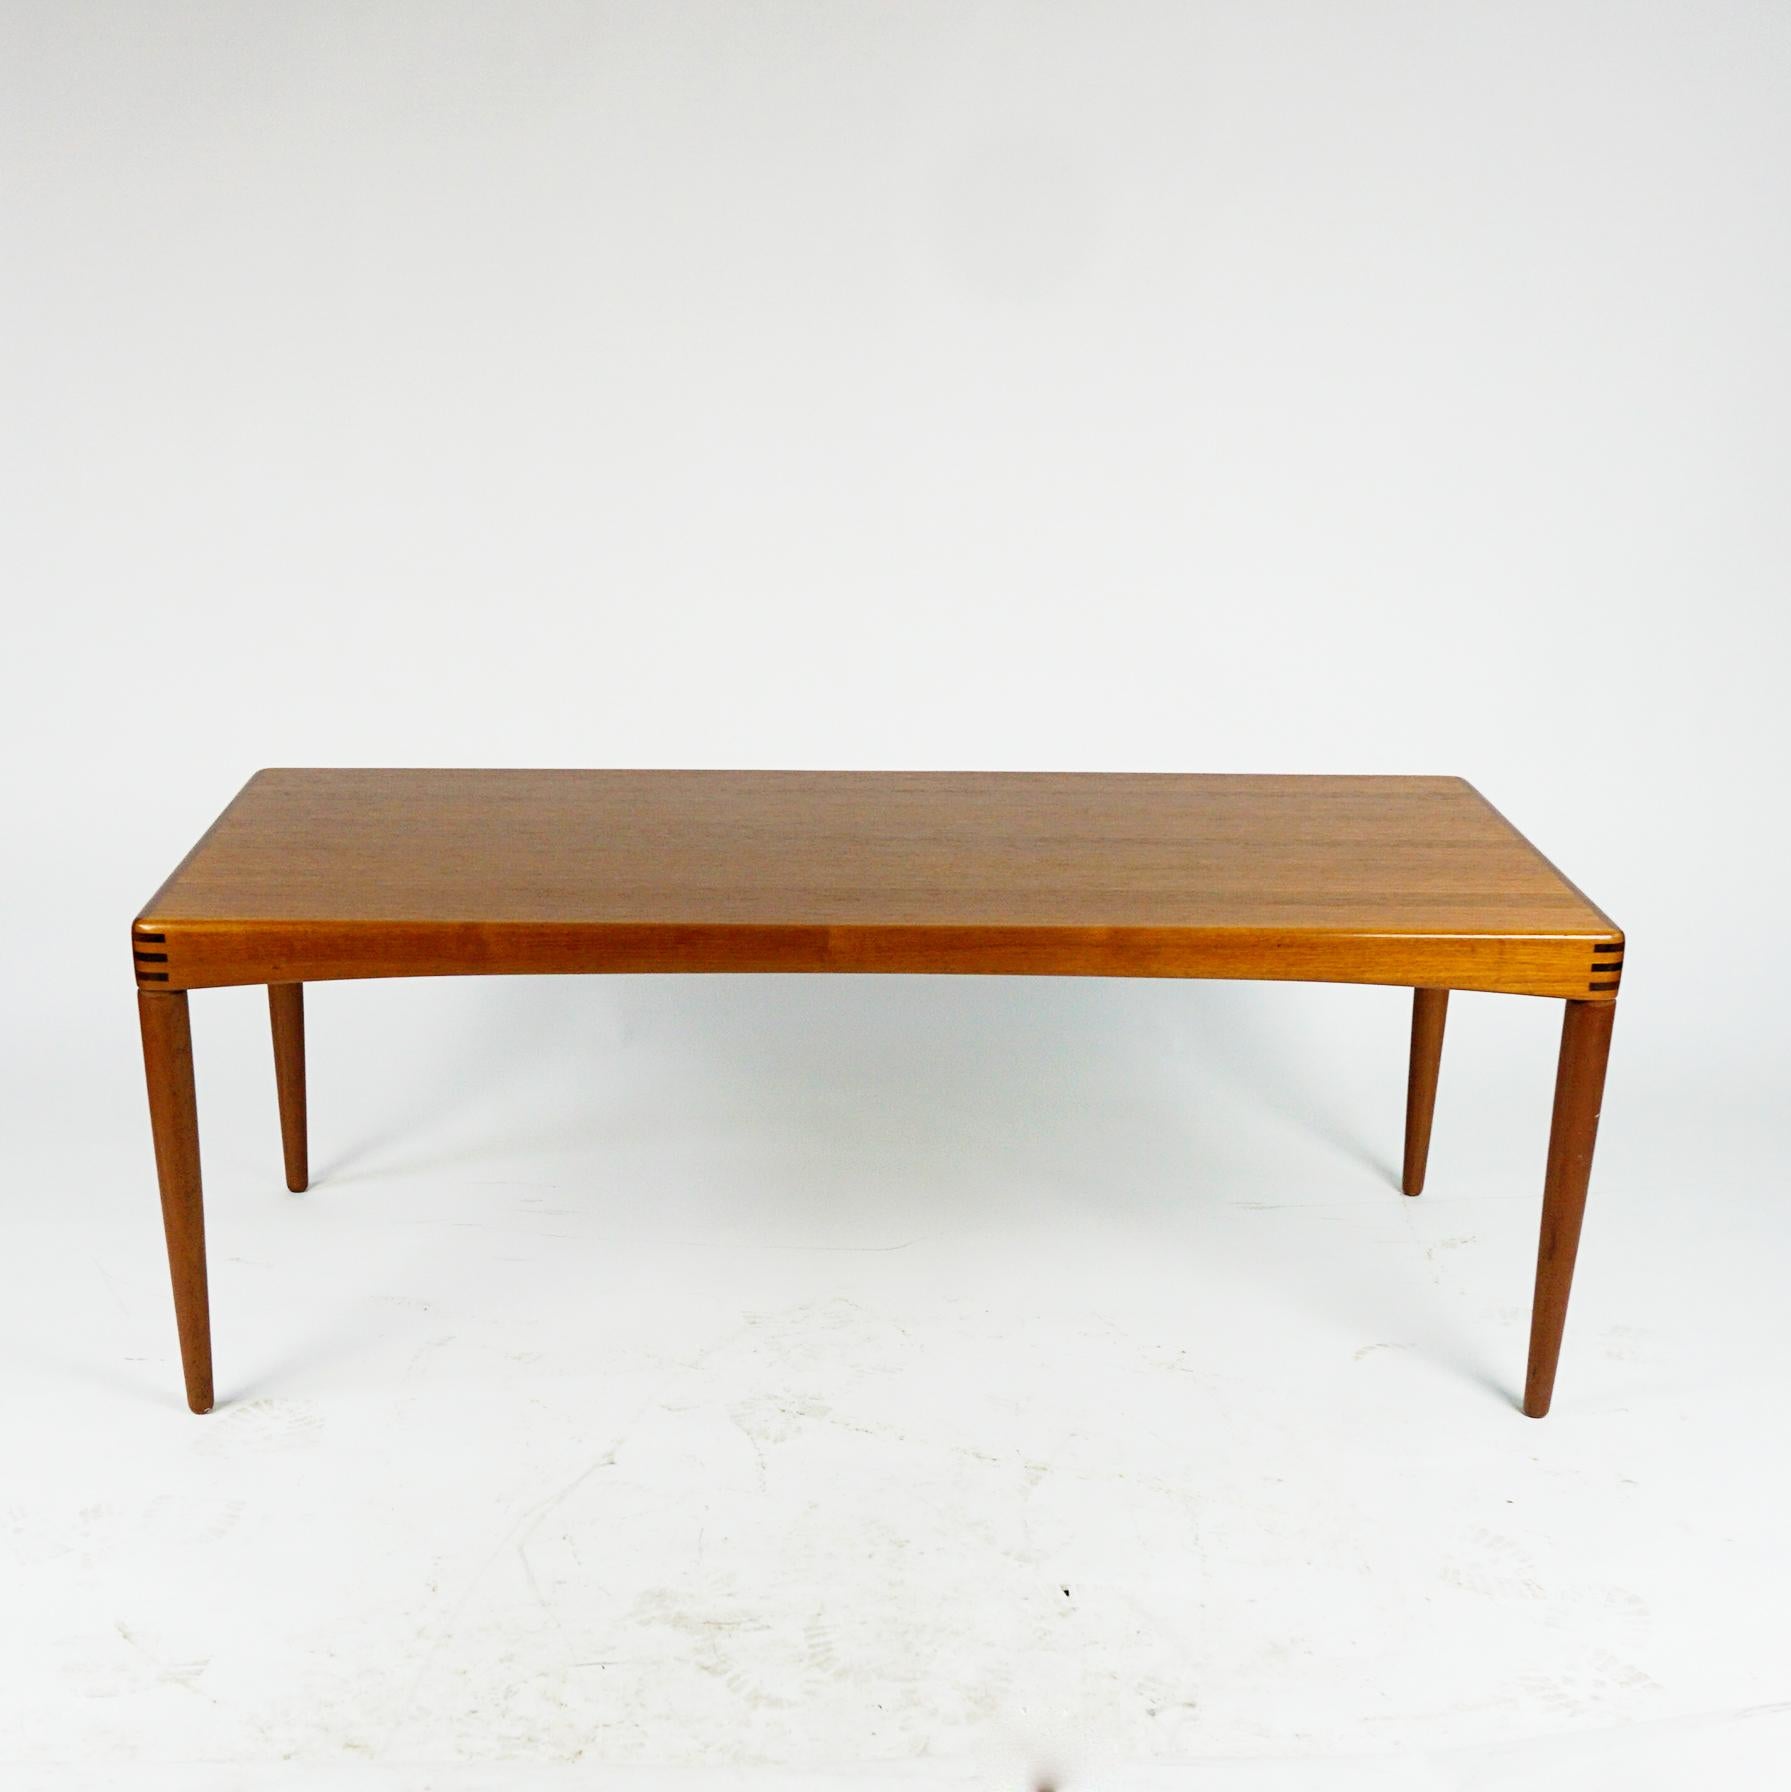 This exceptional Scandinavian Modern Teak coffee or cocktail table was designed by HW Klein and manufactured by Bramin Mobler in Denmark in the 1960's.
This exquisite table features a long table top showing vibrant wood grain, the Klein's signature